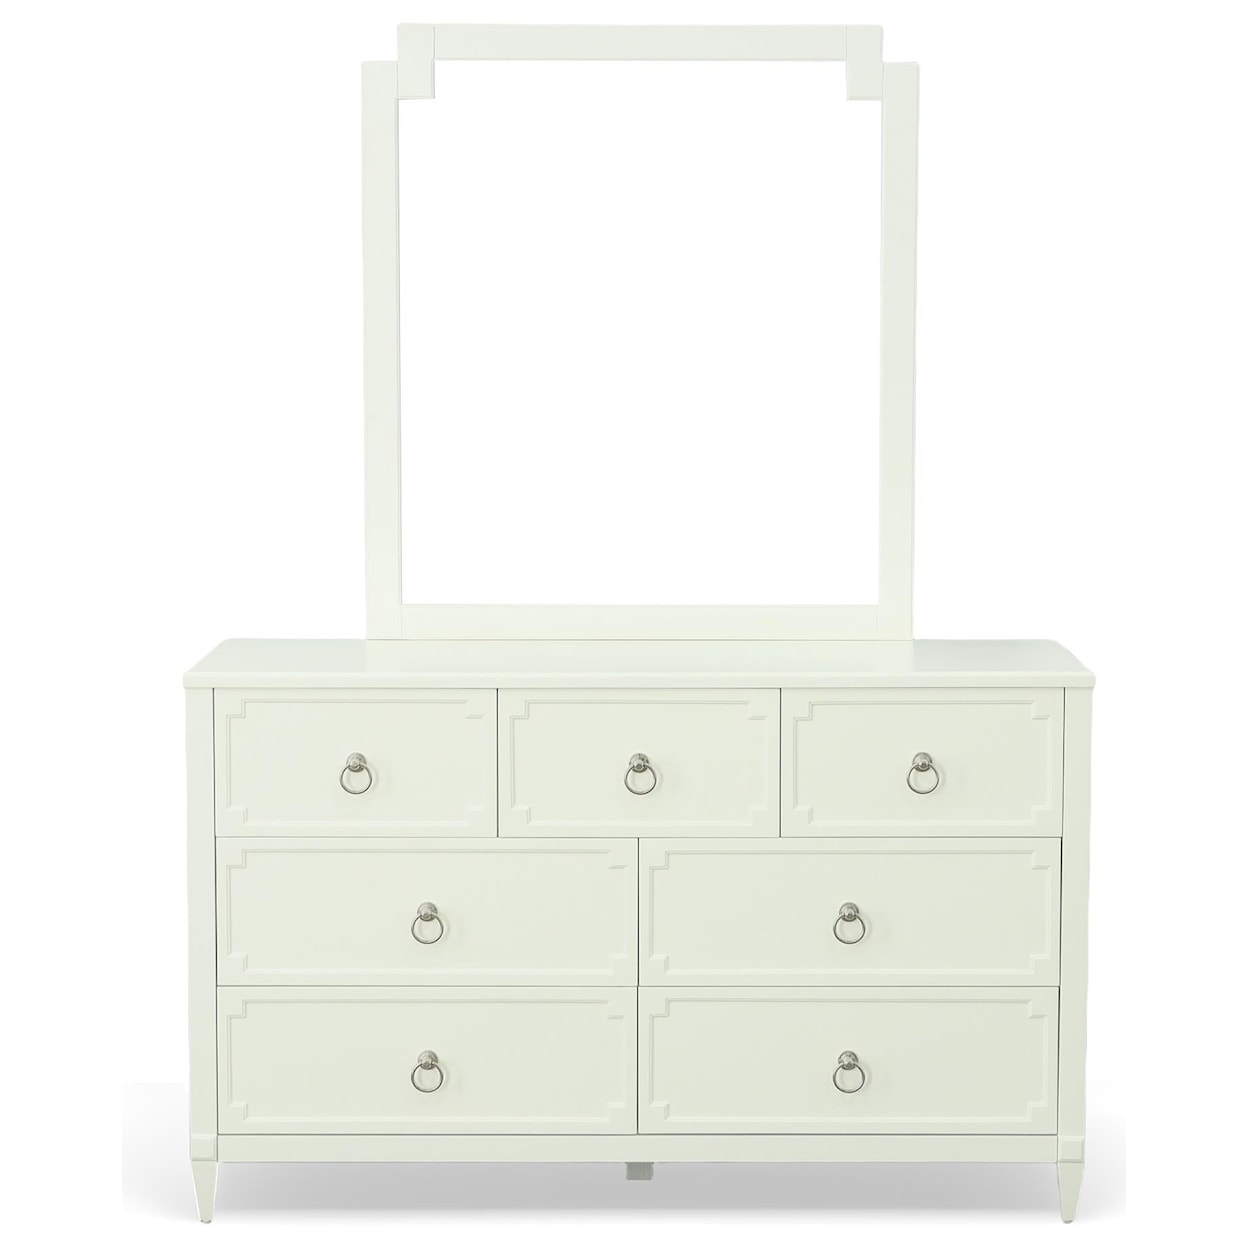 My Home Furnishings Whitehaven Dresser and Mirror